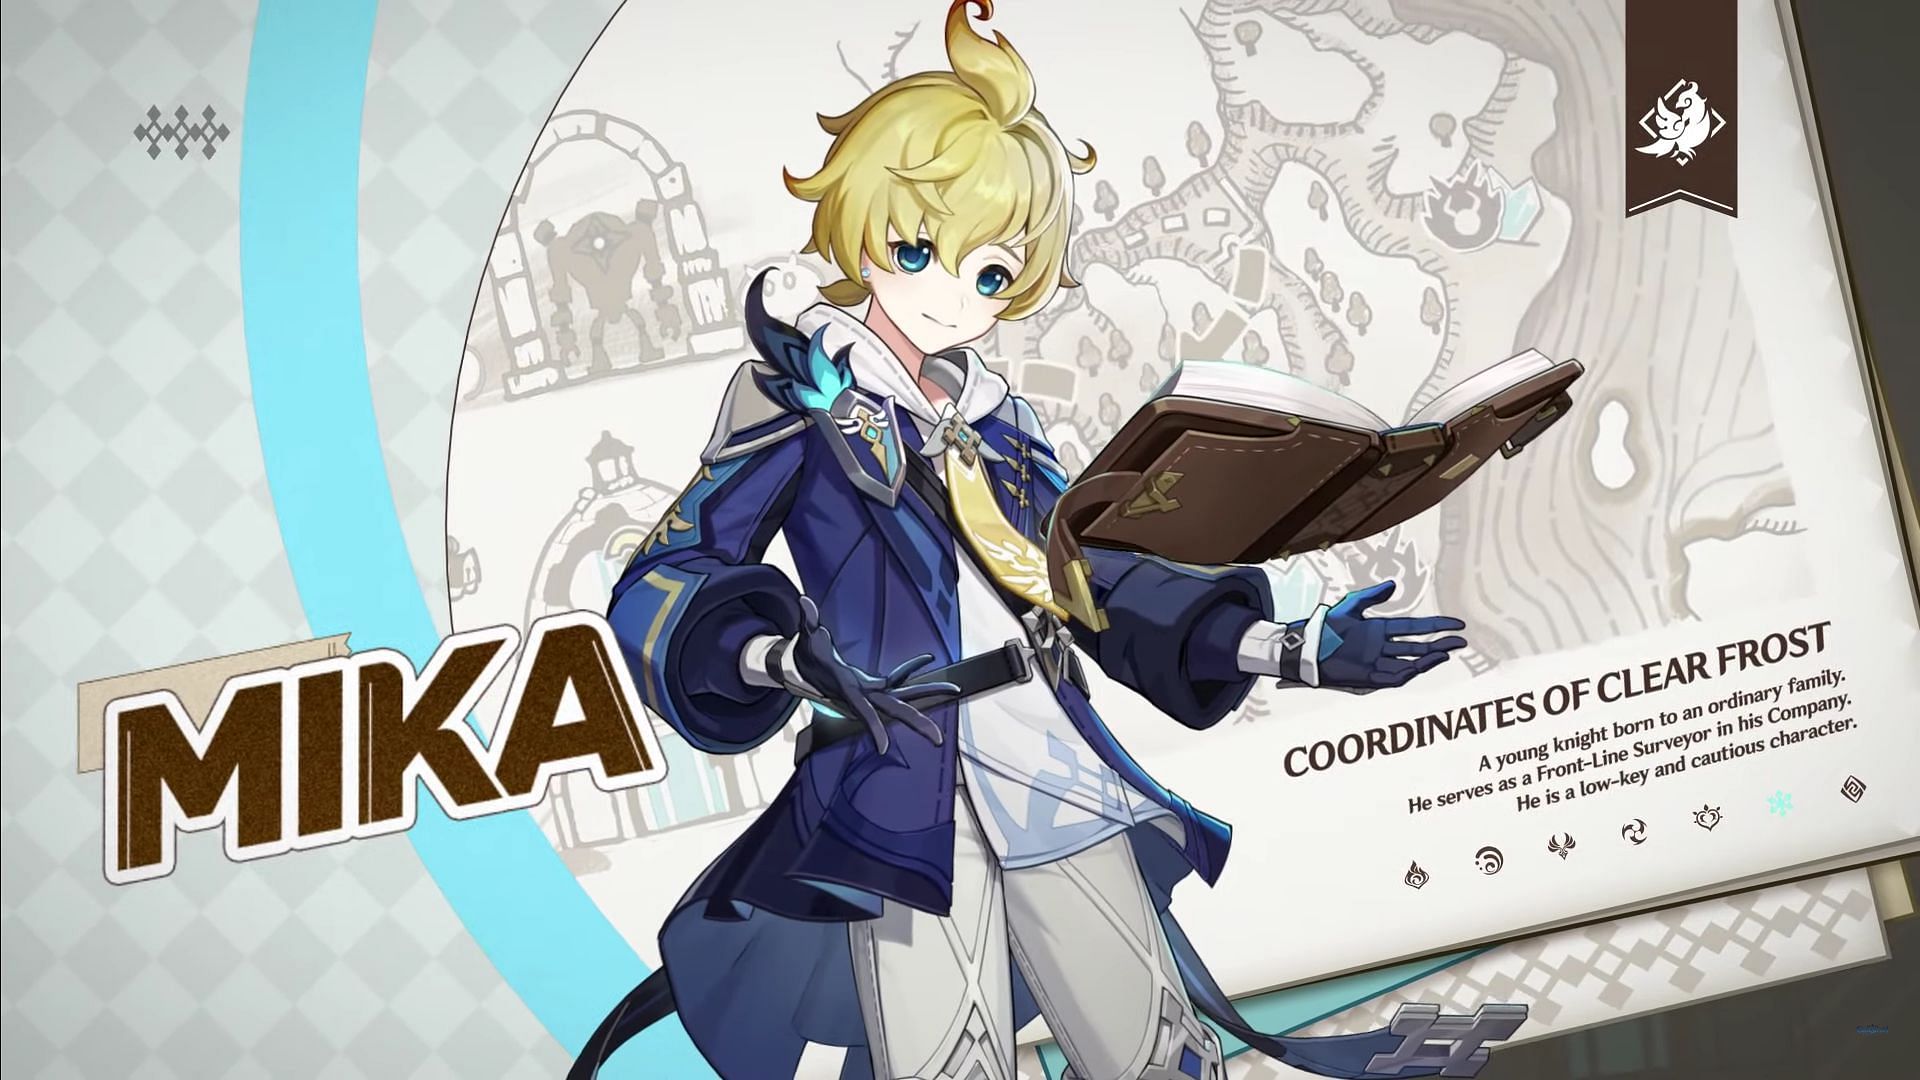 Mika is a new 4-star character in Genshin Impact (Image via HoYoverse)